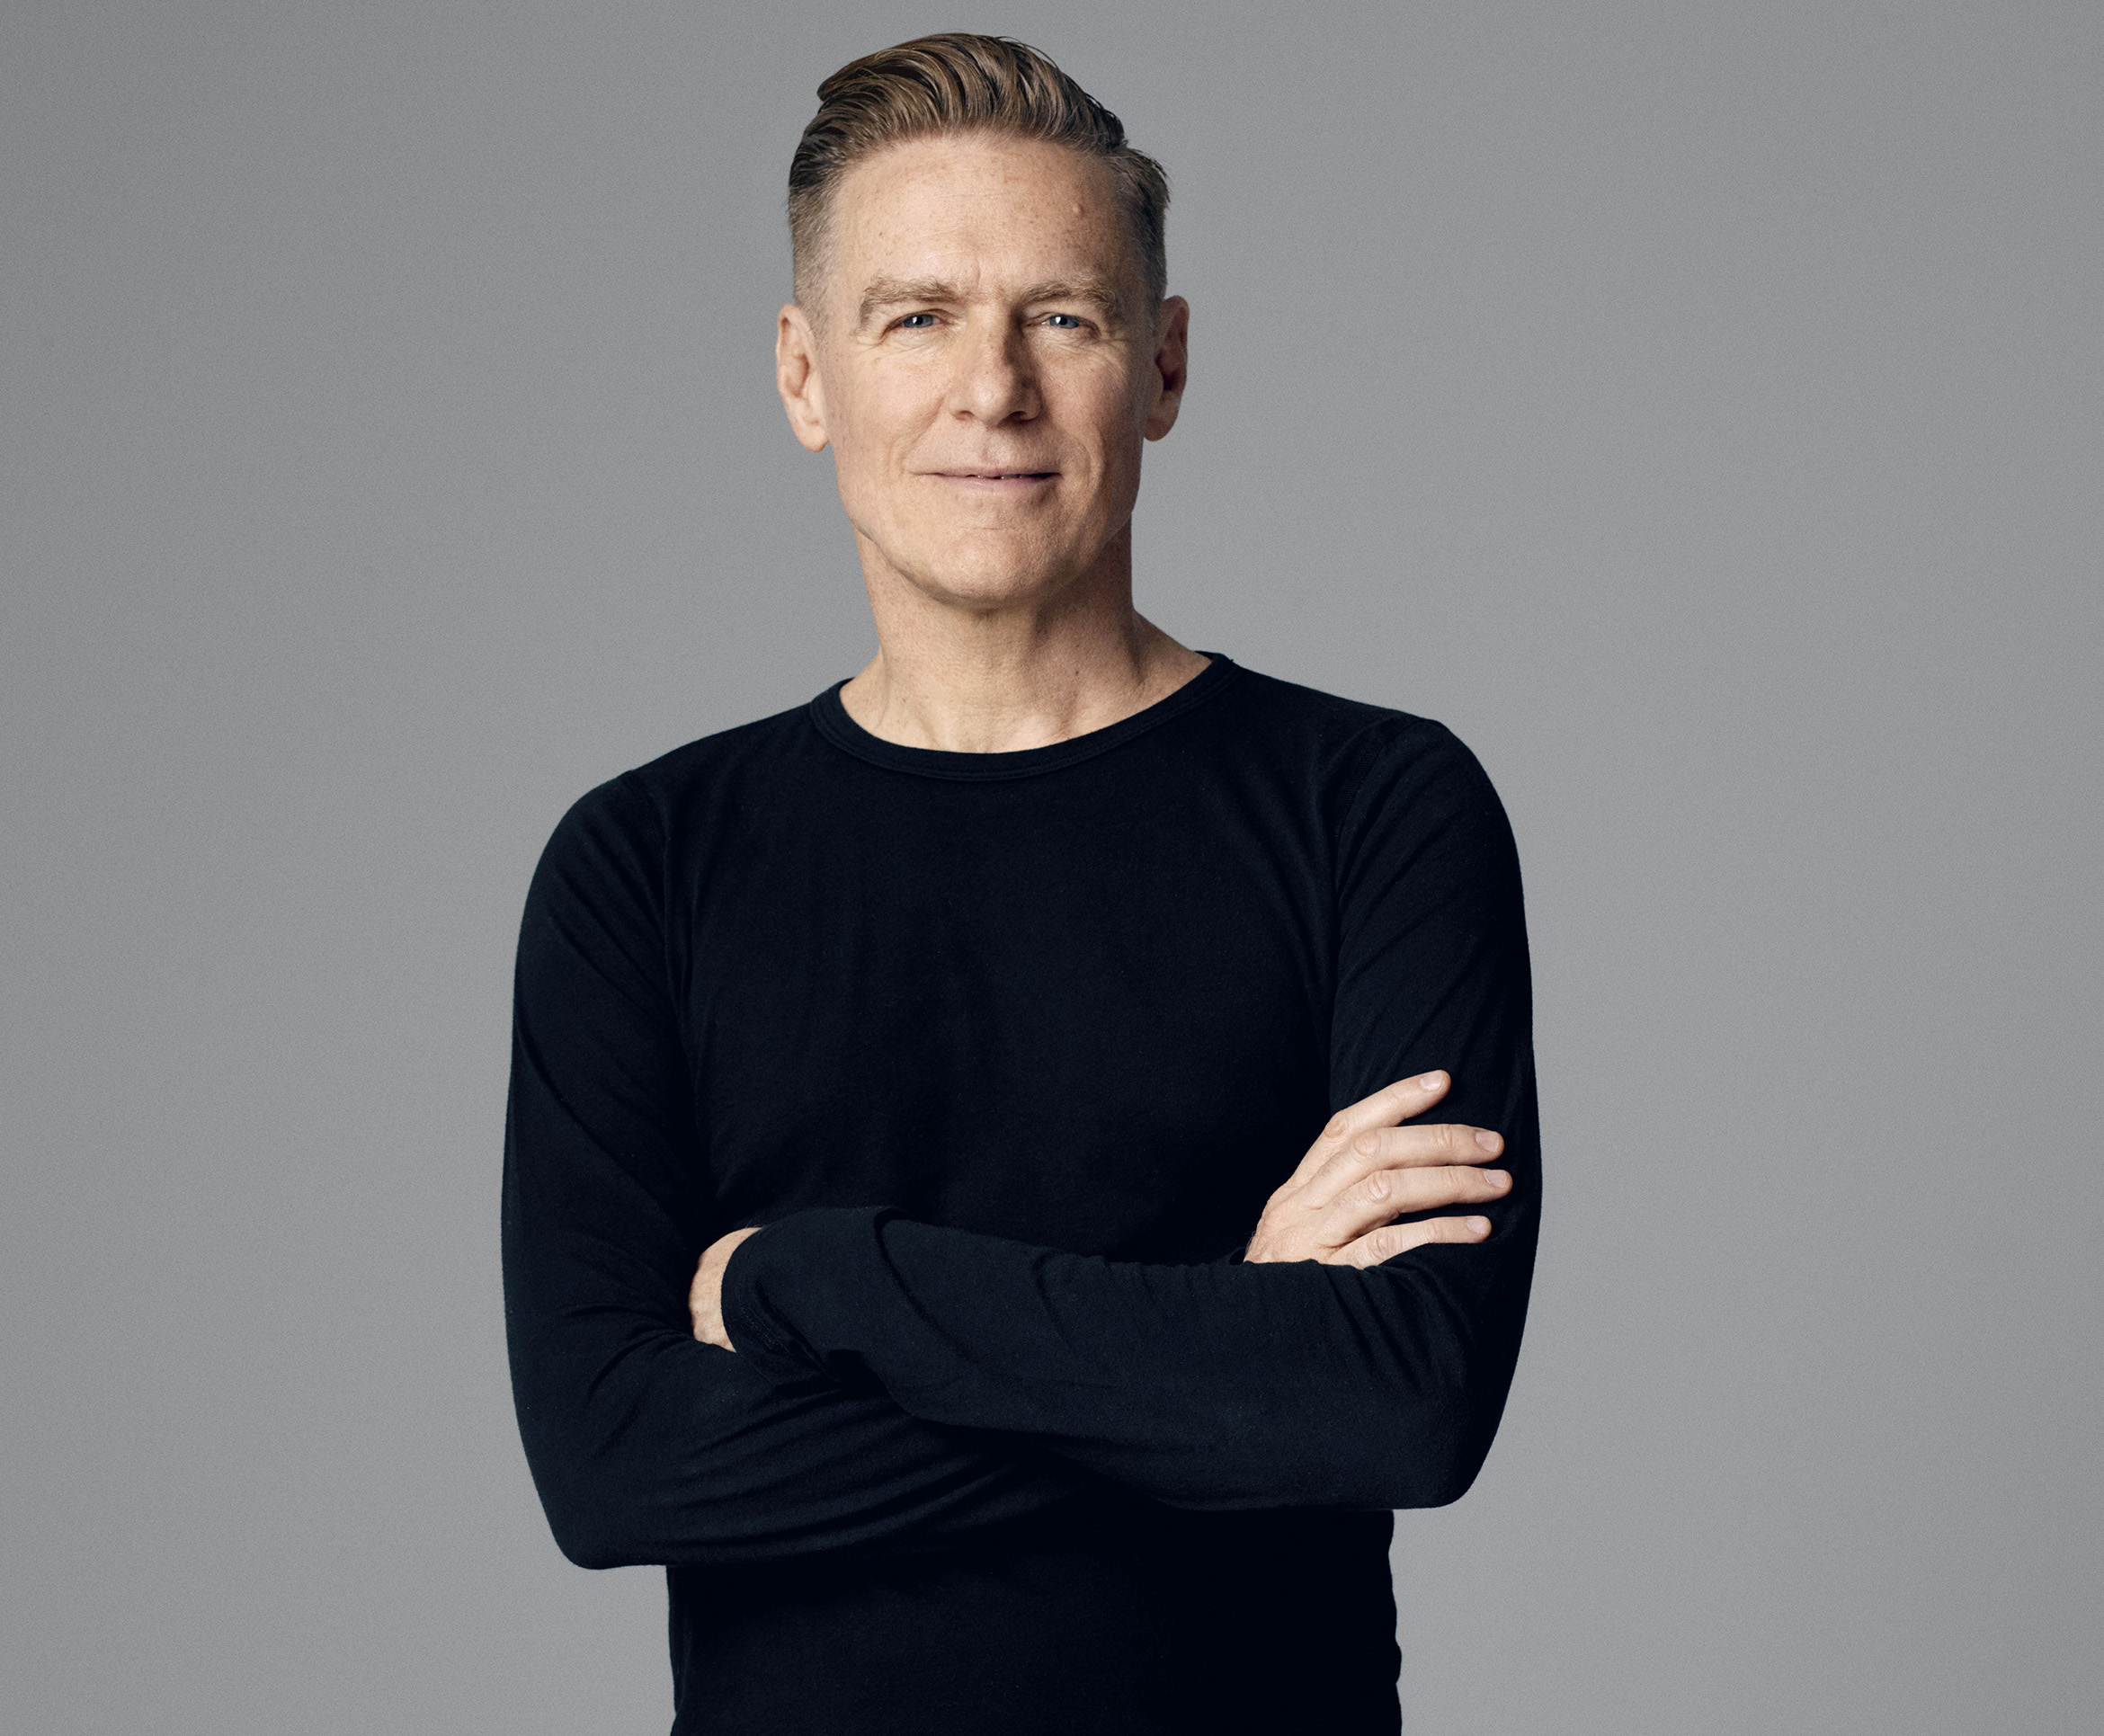 Bryan Adams to Perform in Manila for ‘Get Up’ World Tour